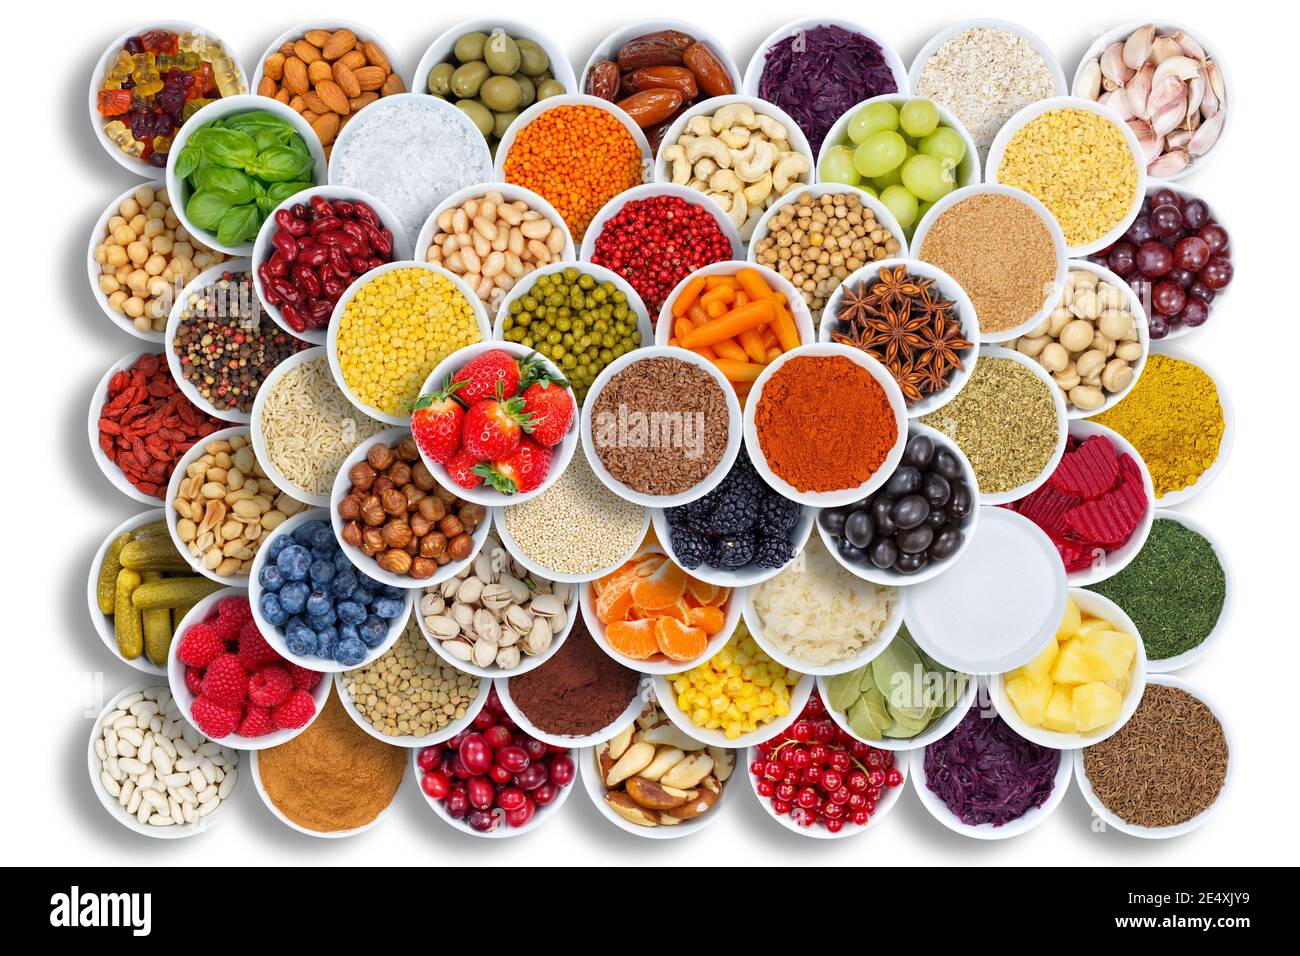 Fruits and vegetables spices ingredients cooking bowls berries food grapes from above fruit Stock Photo